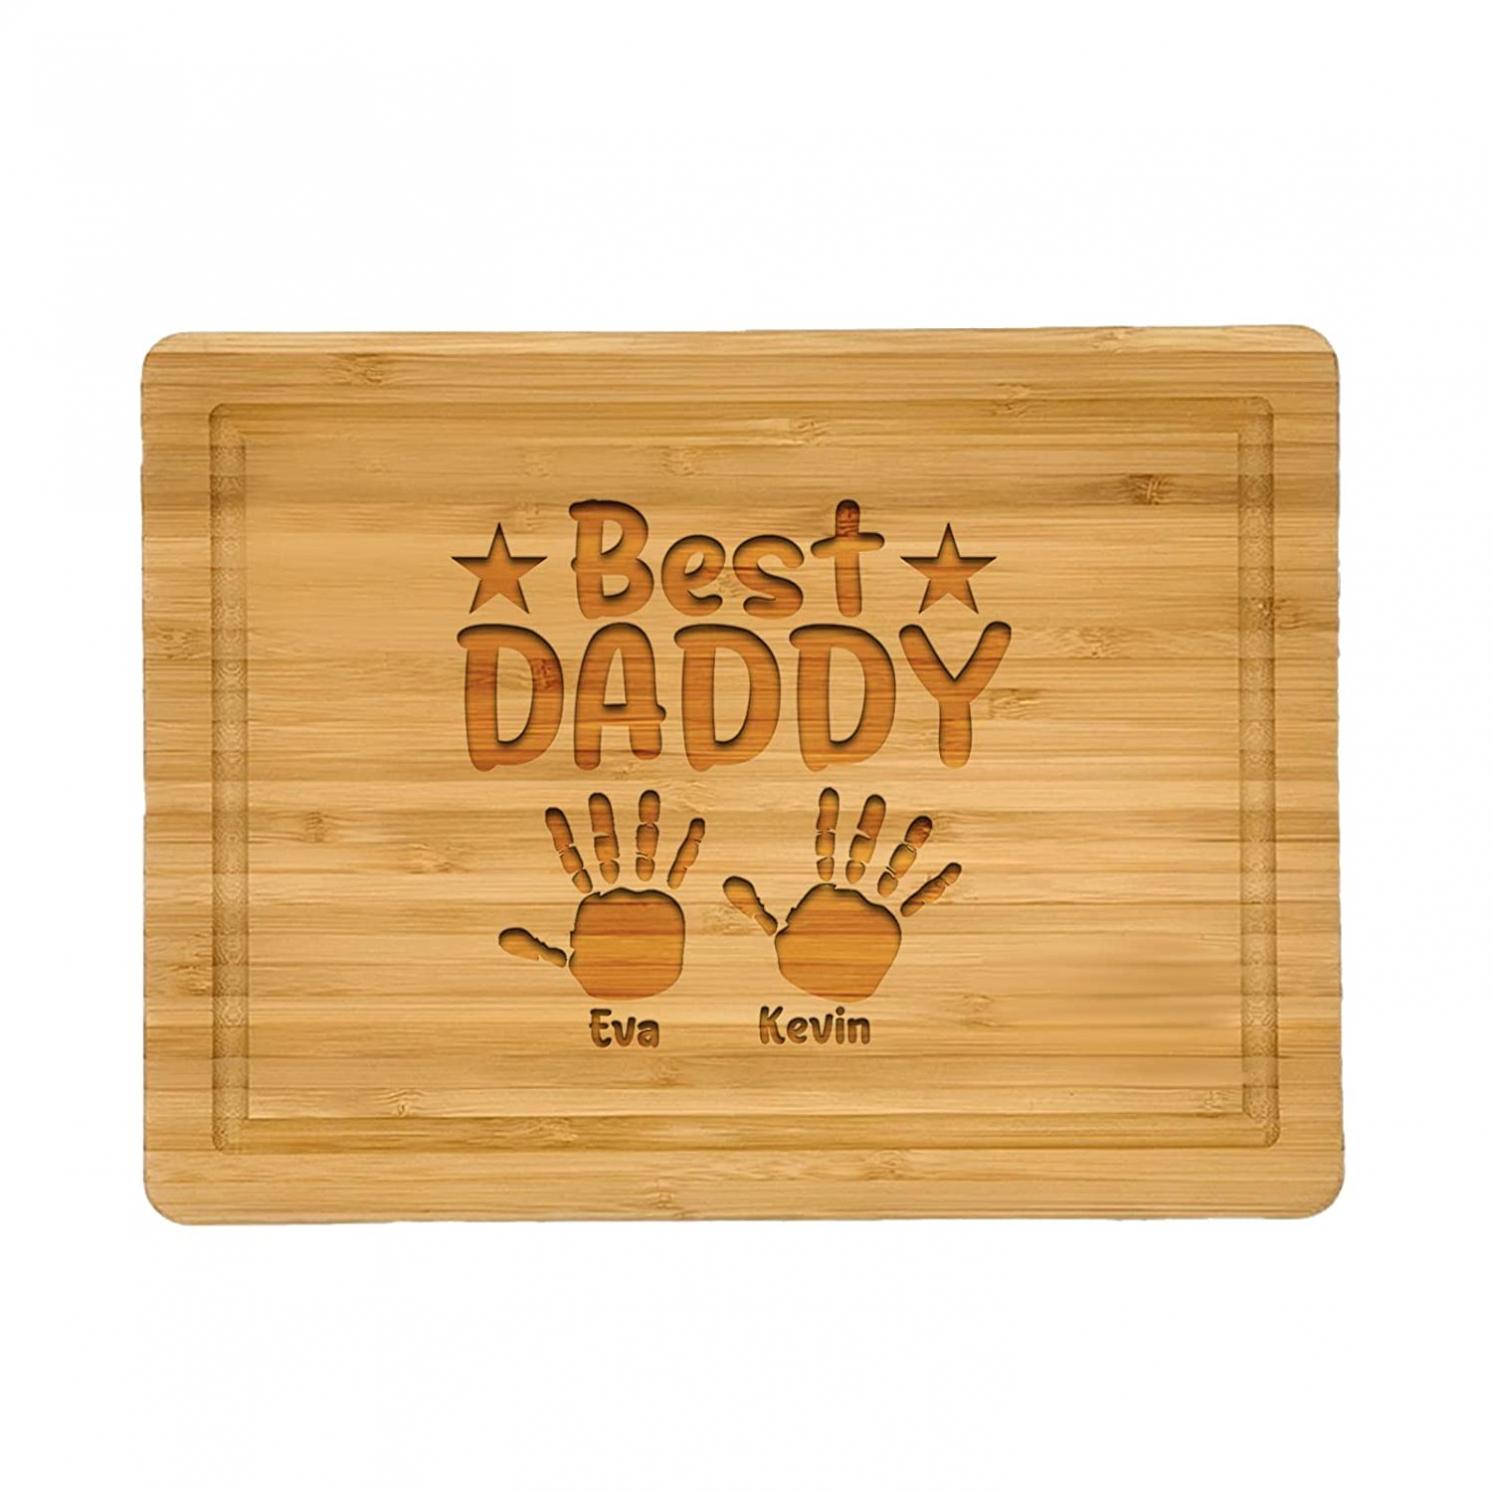 Best Daddy Ever Gifts, Dad Cutting Board, Dad gifts from kids, Bamboo Cutting Board, Father Birthday gifts, Father day gifts, Personalized Cutting Boards, Presents for Dad, Engraved Cutting Board